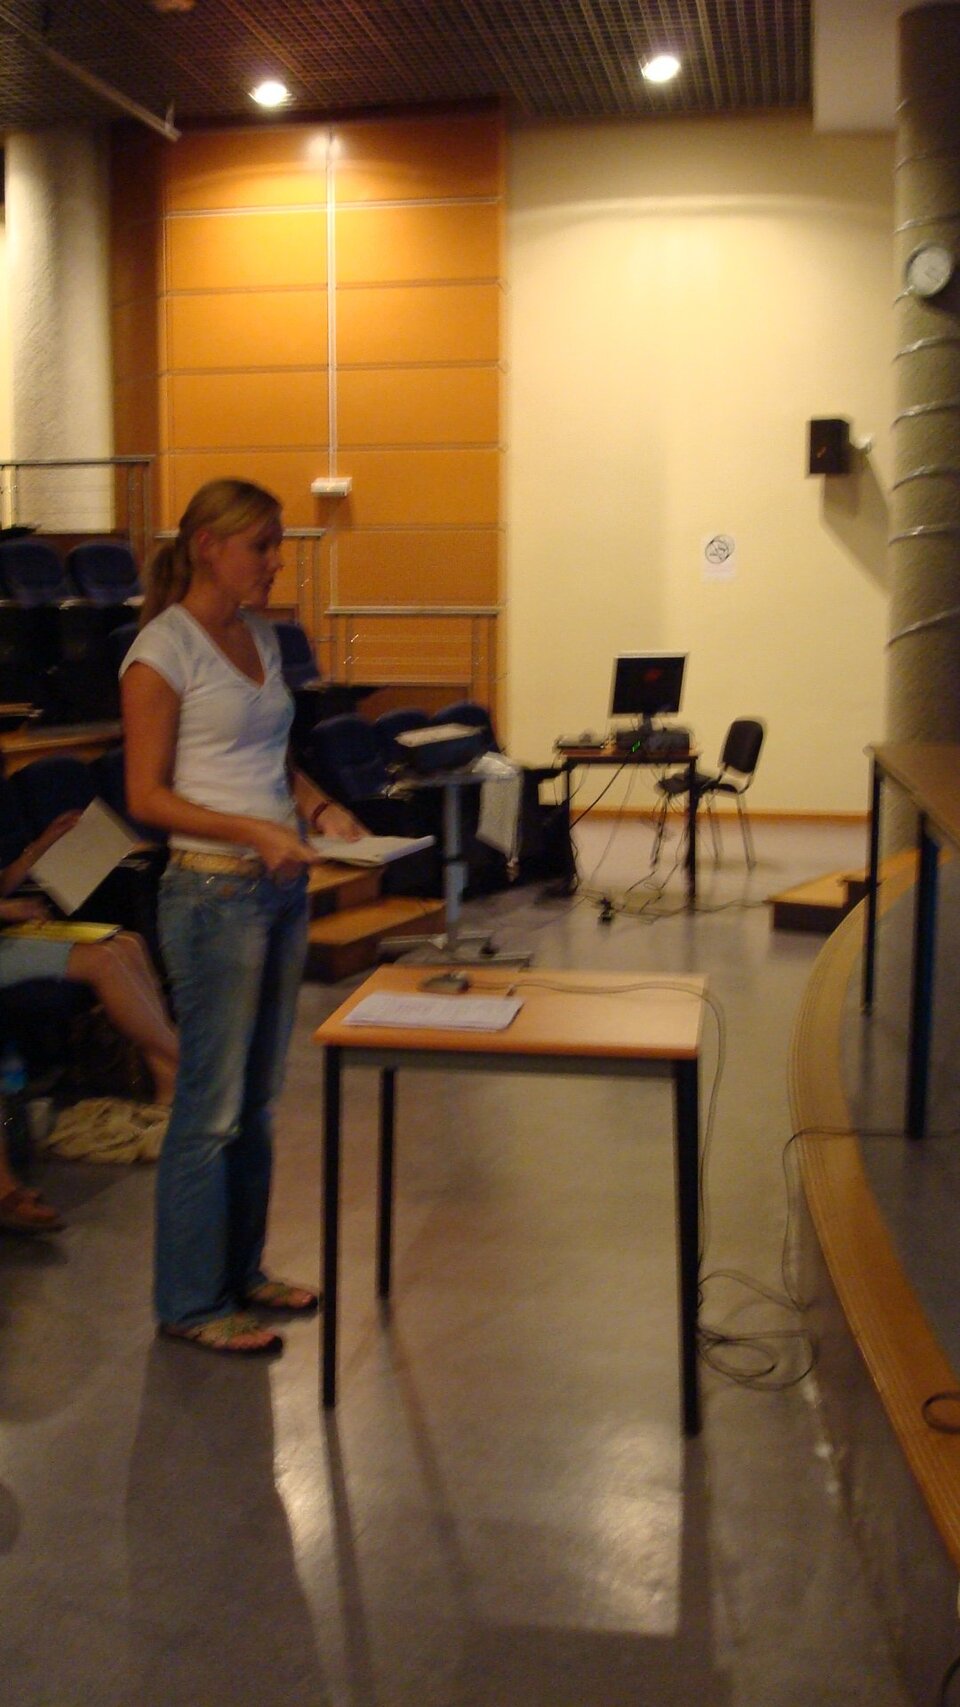 One of the students asking a question to Frank De Winne